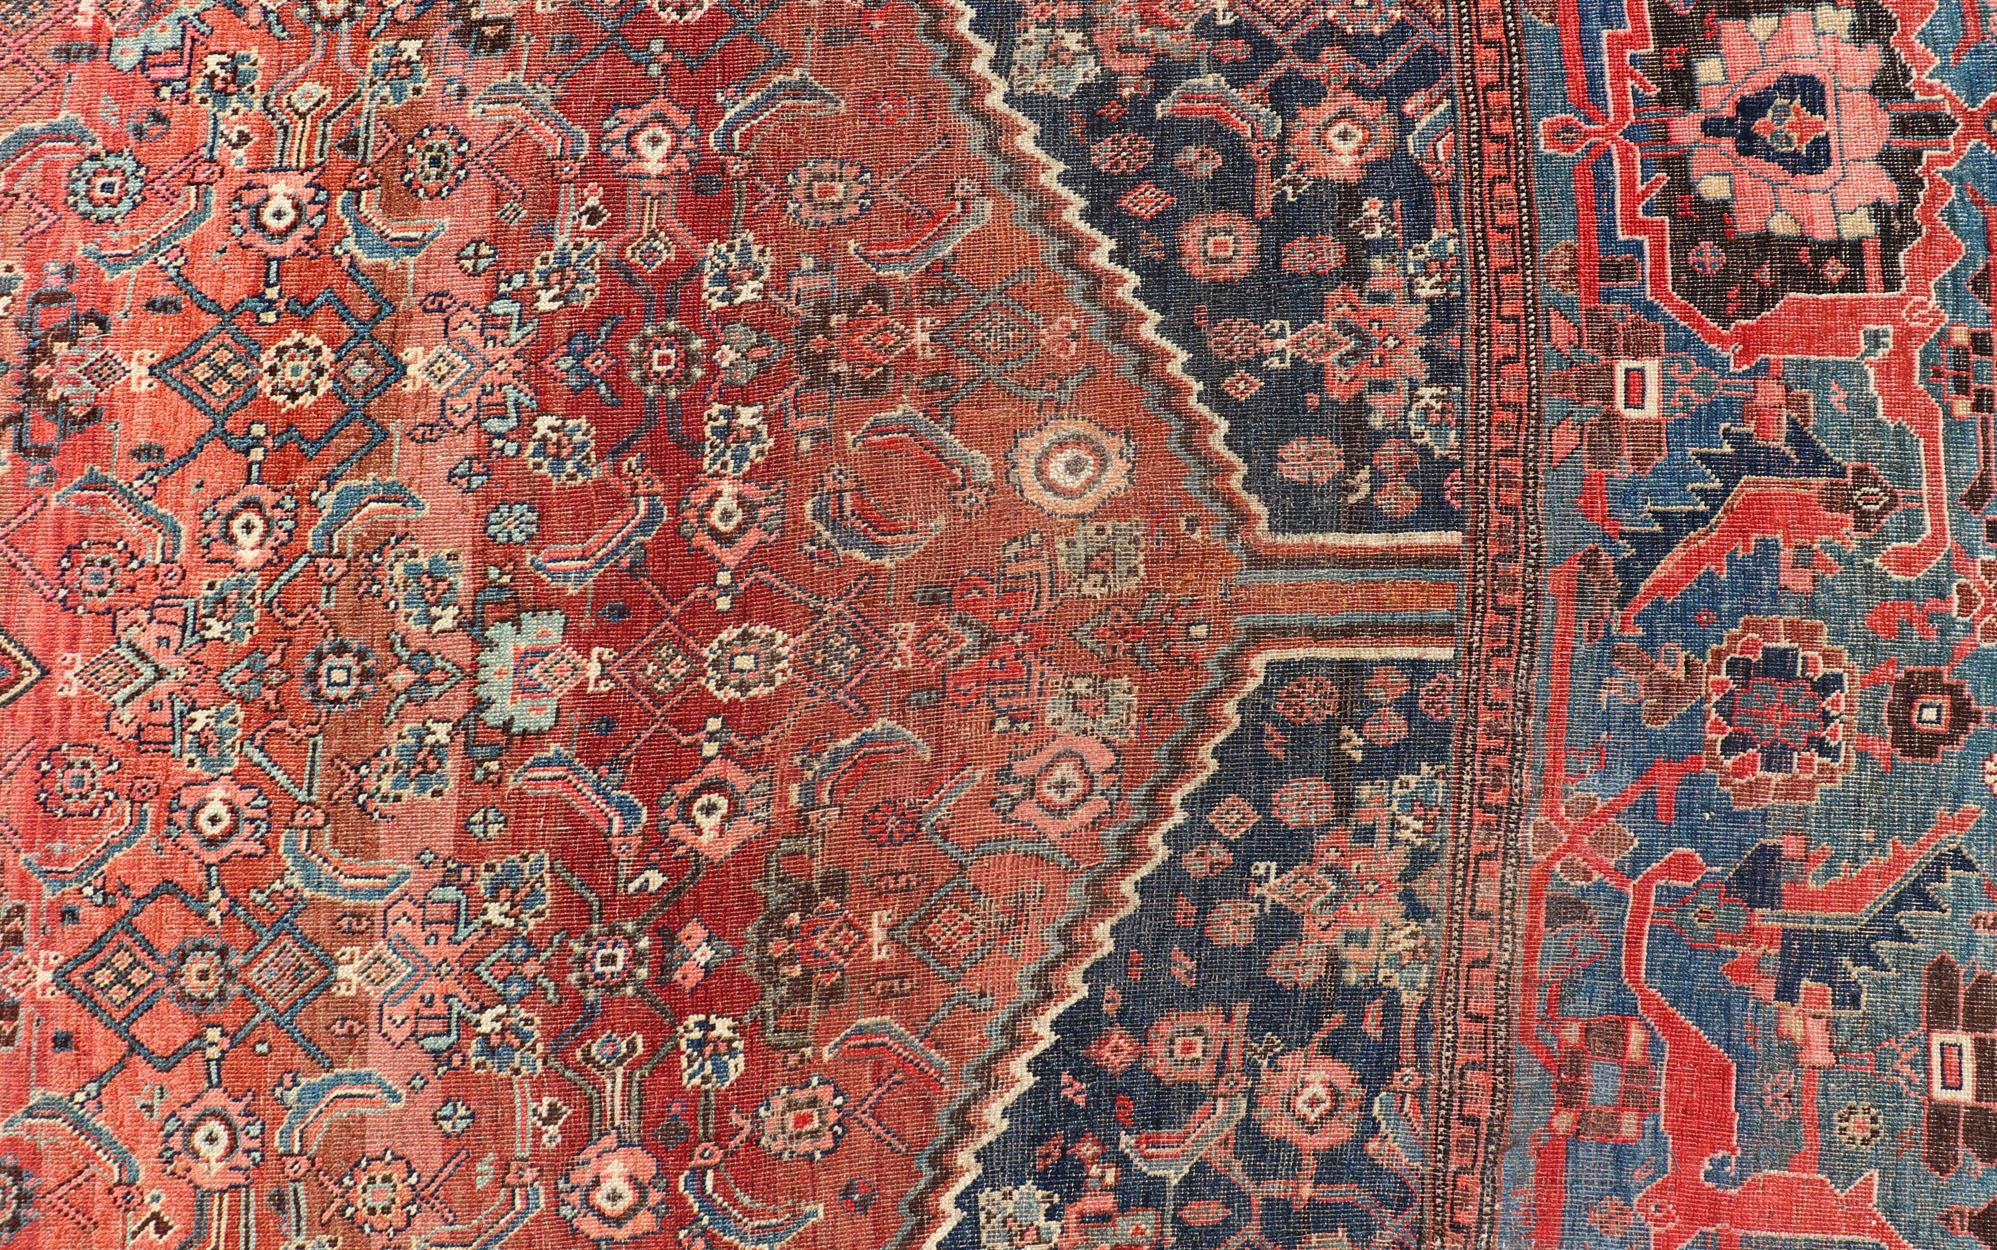 Wool Very Large Antique Persian Bidjar Rug in Multi Shades of Blue, Tera-Cotta & Red For Sale